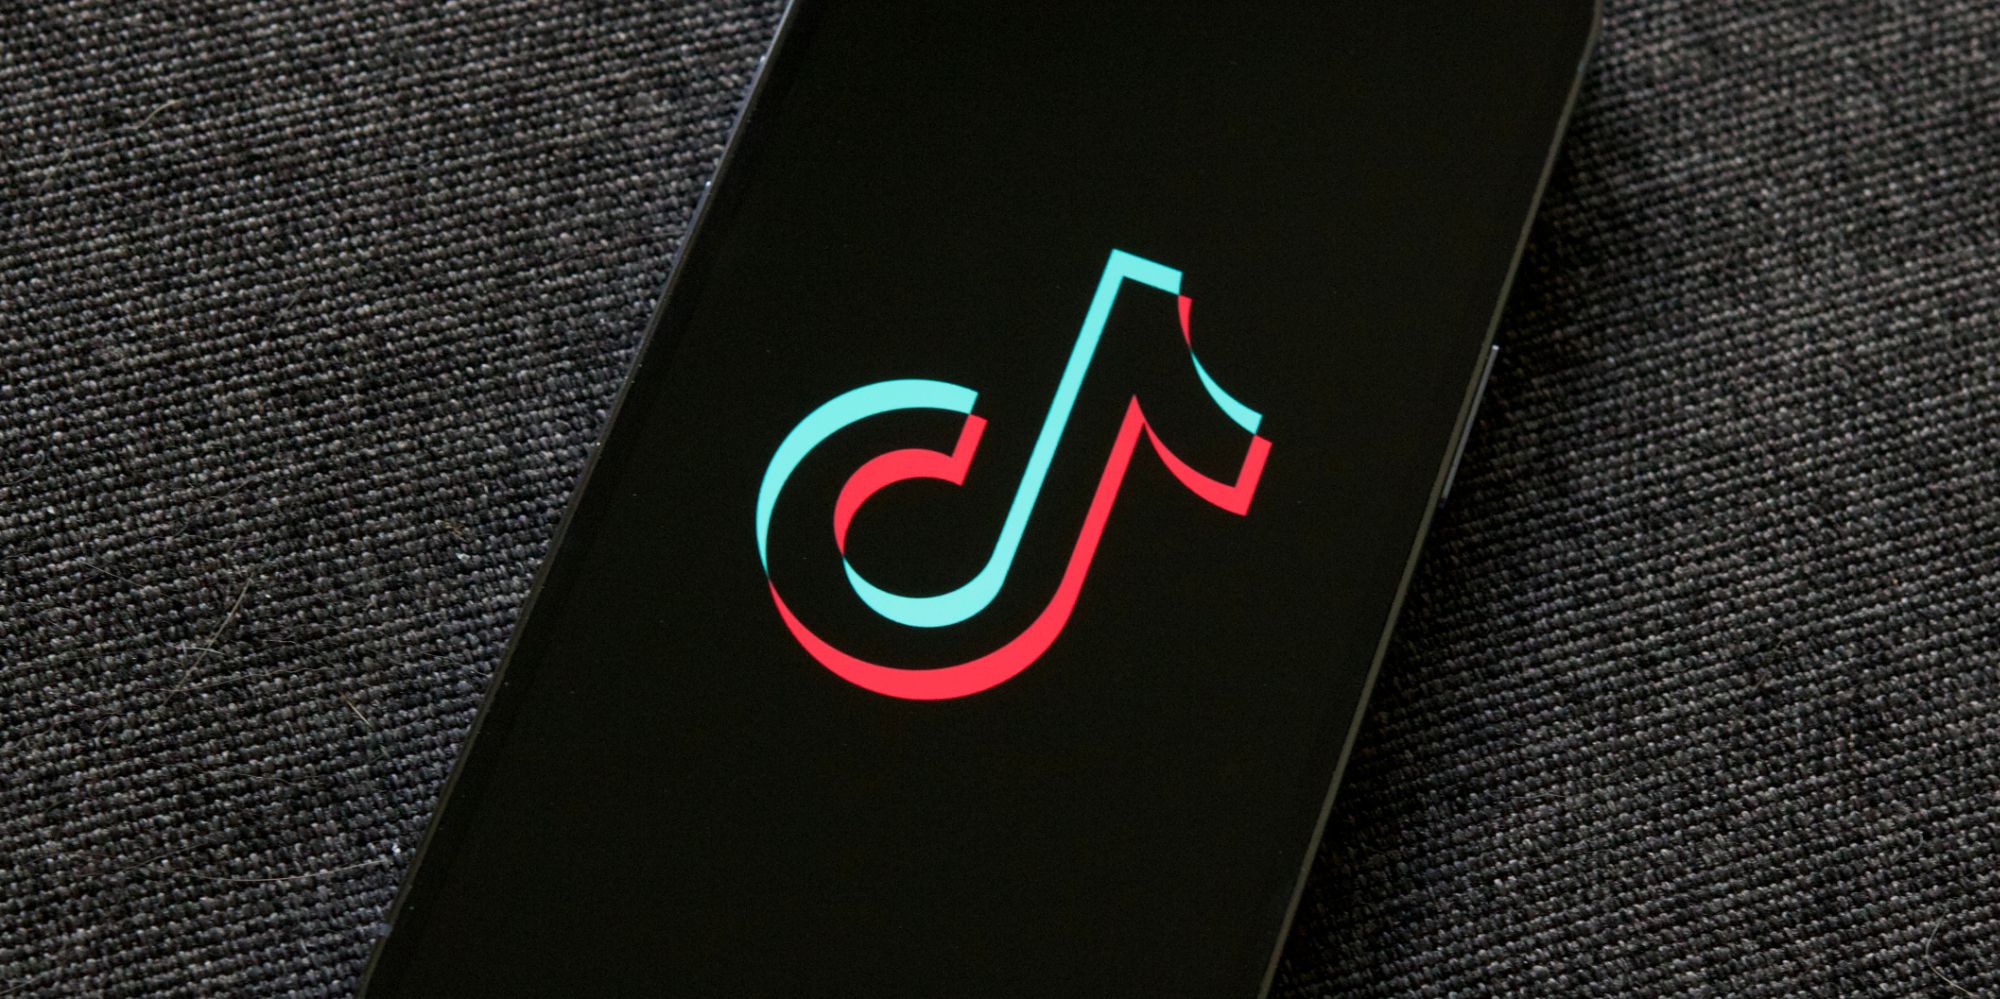 Why Games Might Be TikTok’s Next Big Move